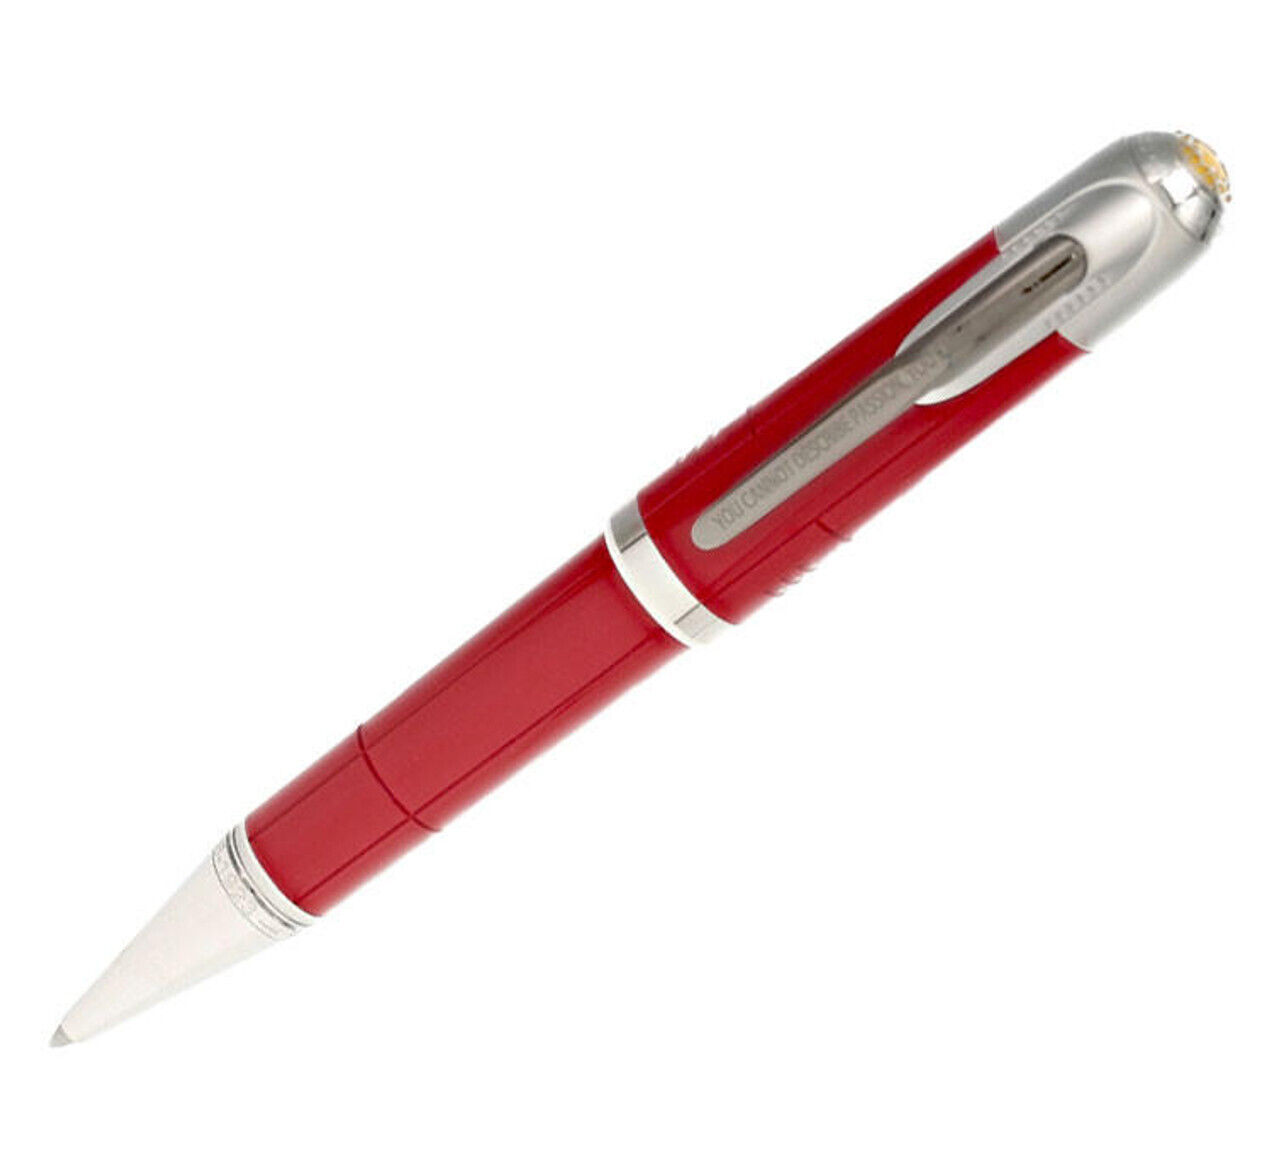 MONTBLANC Great Characters Enzo Ferrari Special Edition Ballpoint Pen 127176